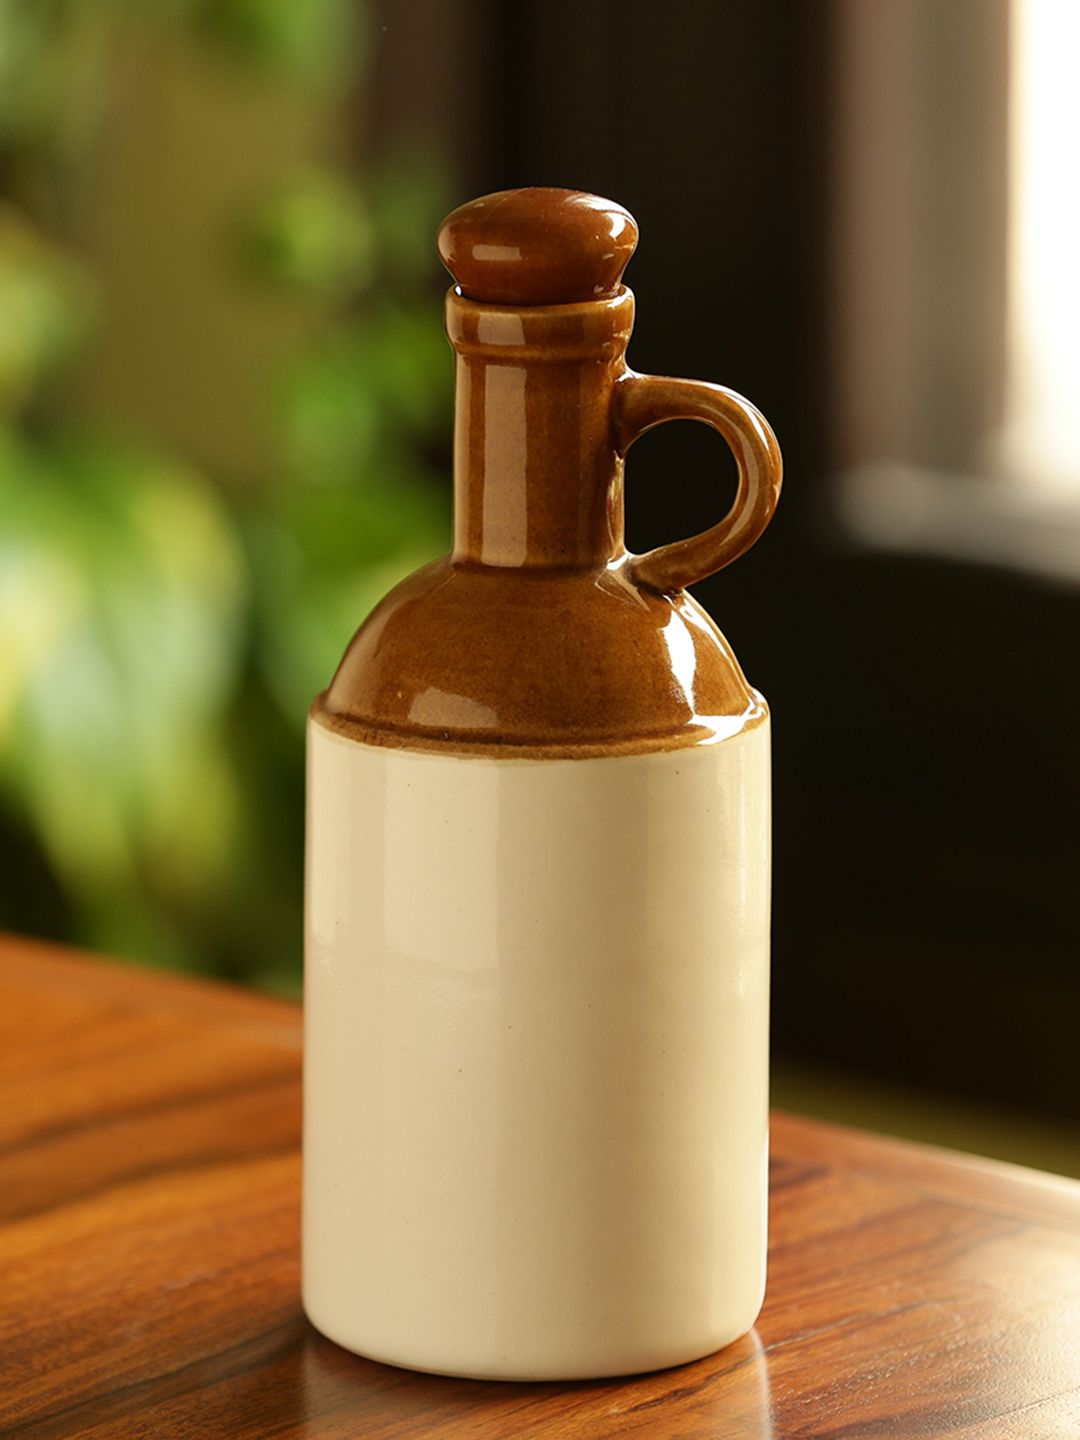 ExclusiveLane Brown & Off-White Old Fashioned Hand Glazed Pottery Ceramic Oil Bottle Price in India